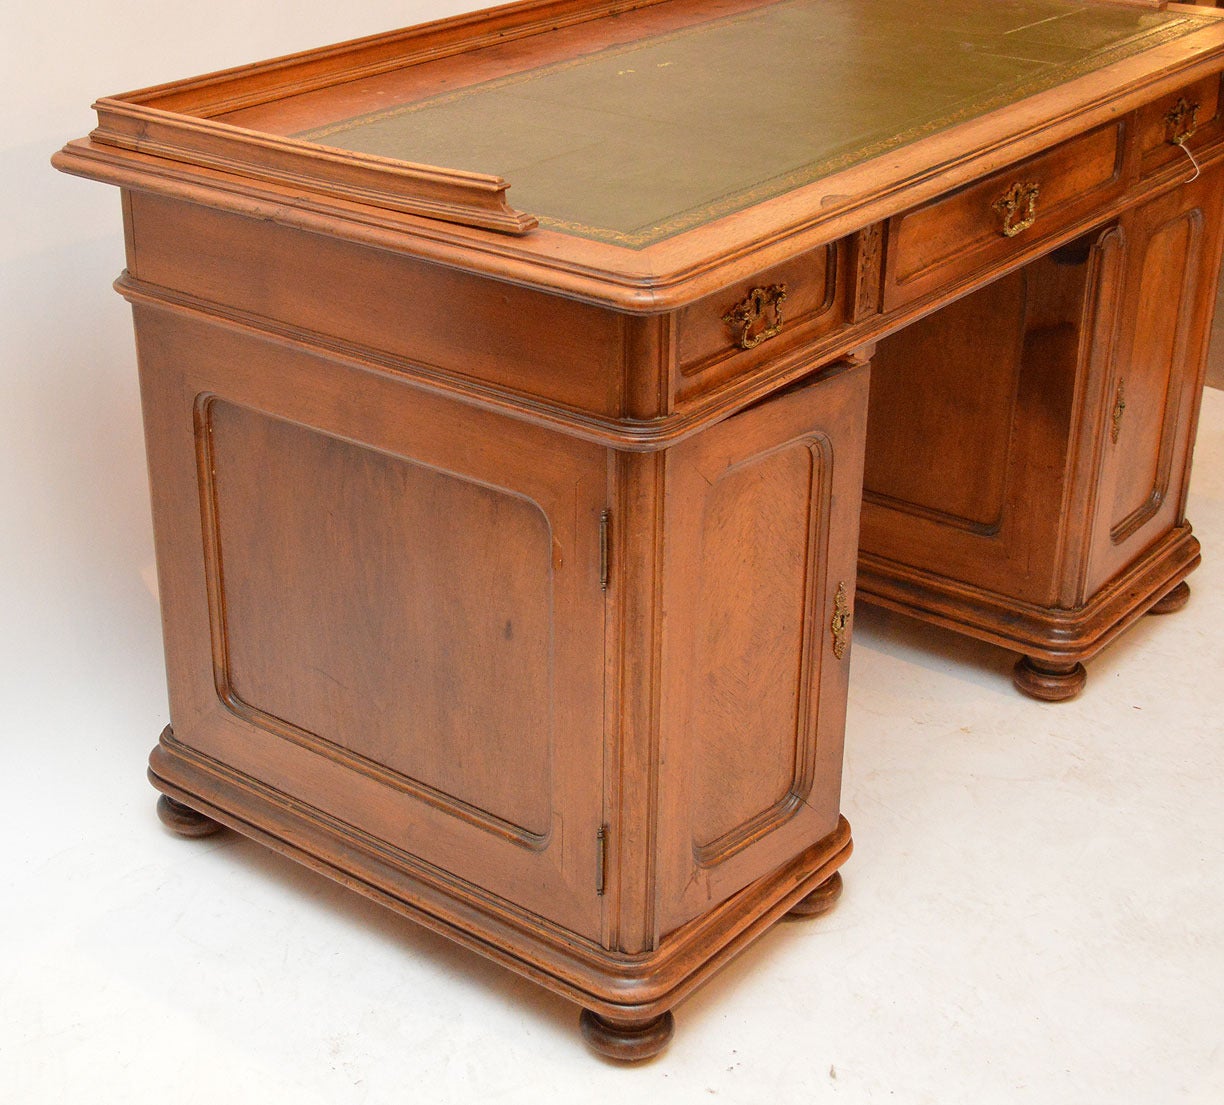 This is a very nice French walnut ladies pedestal wring desk with a green leather to the top.
It sits on two pedestal with a door either side above three drawers with the original brass handles.
The drawer linings are solid wood with dovetail